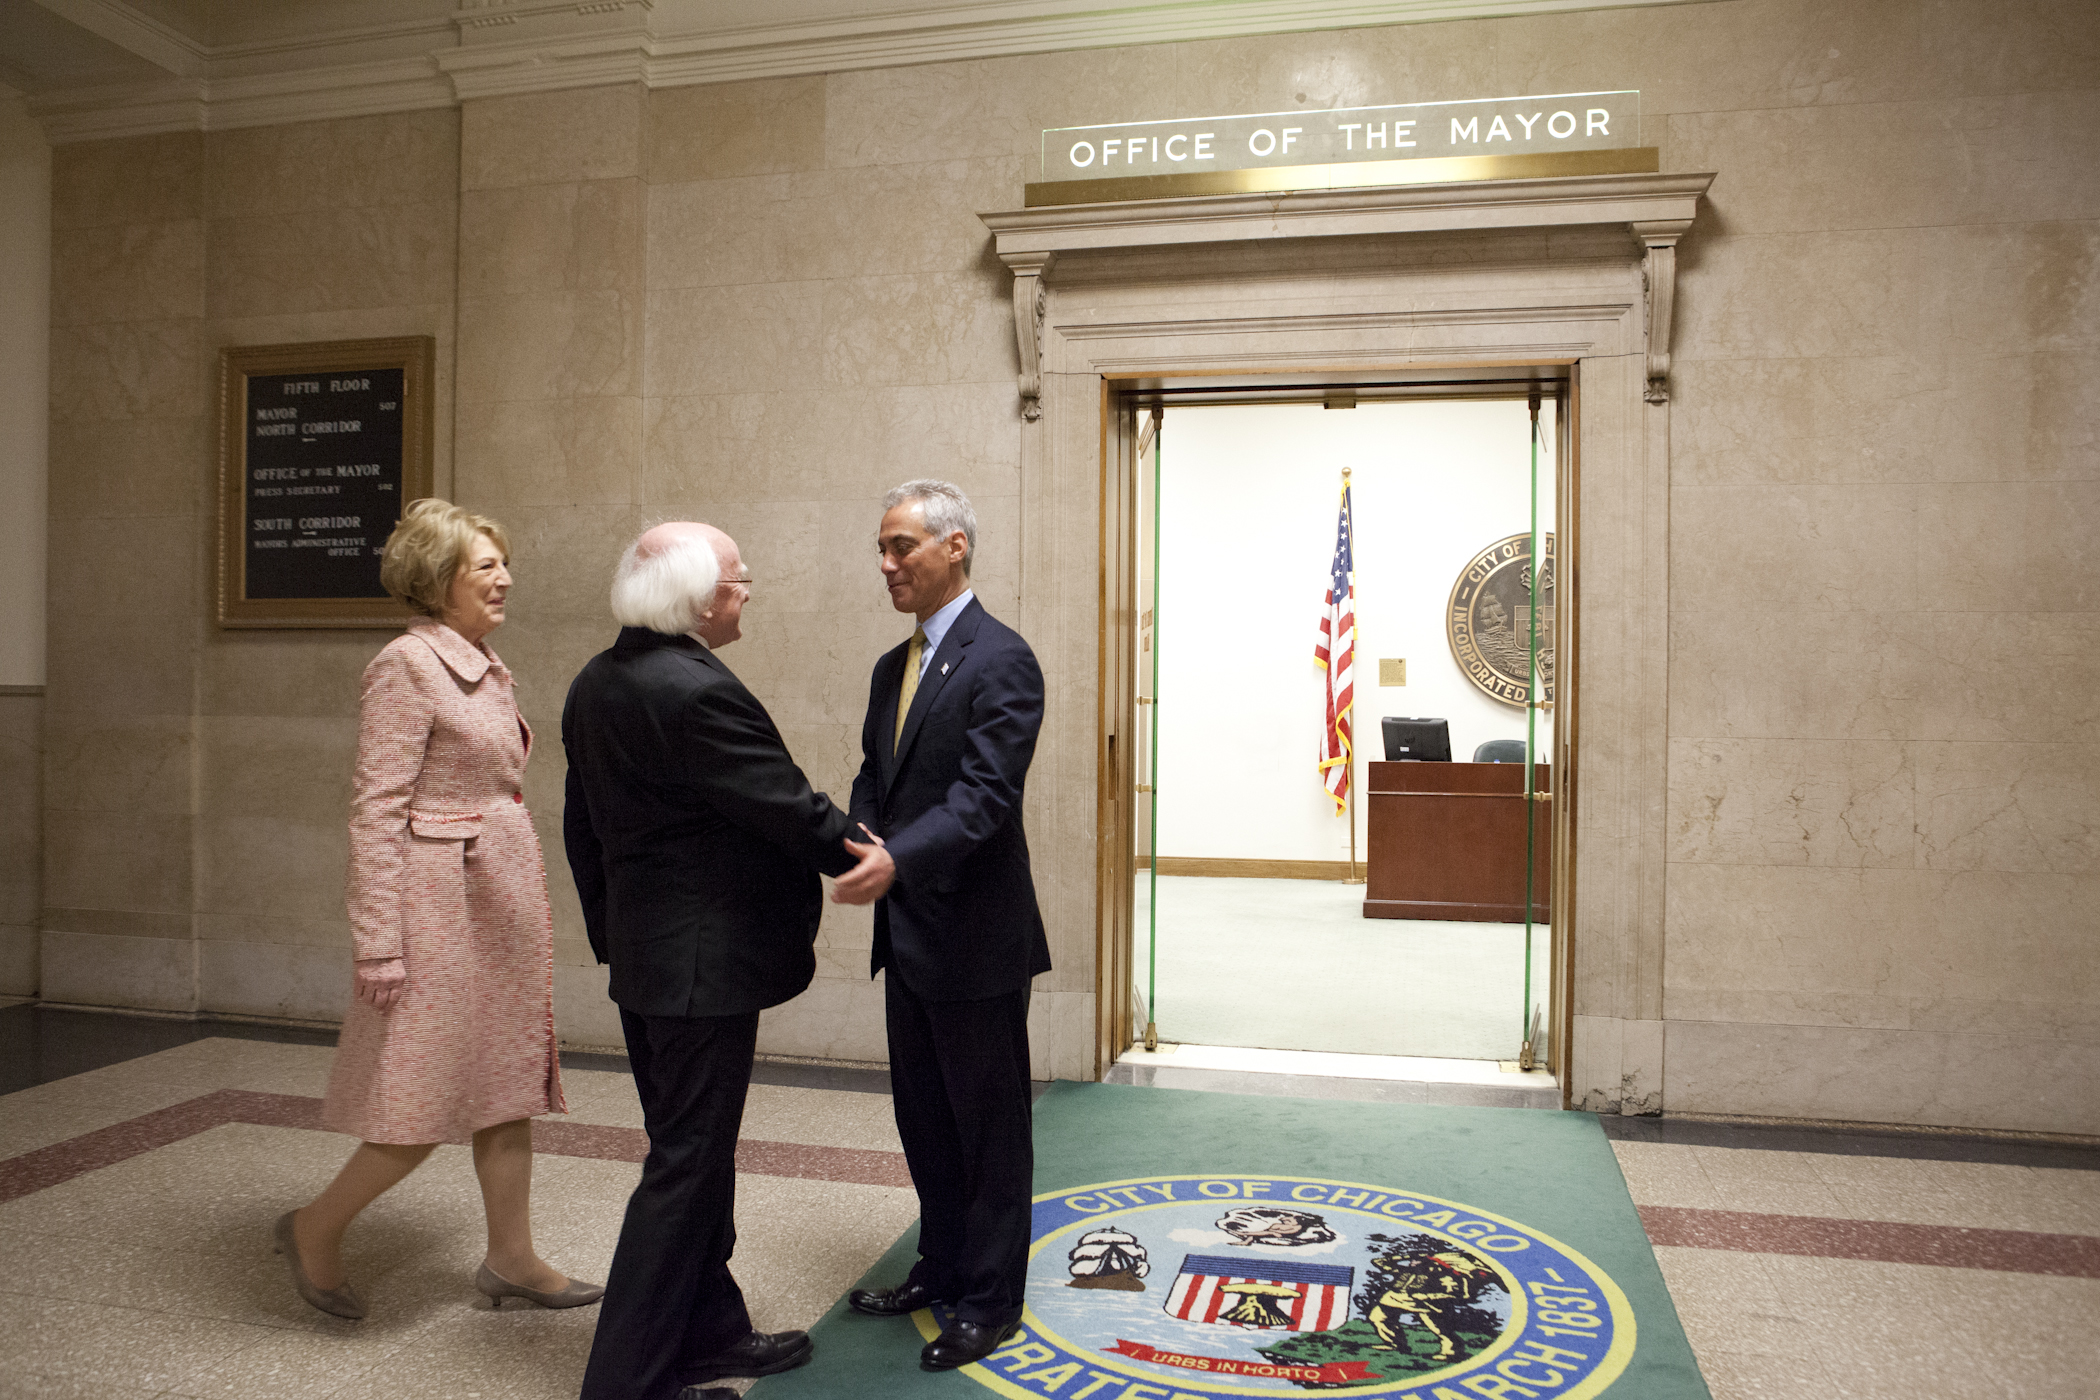 Mayor Rahm Emanuel welcomes His Excellency President Michael D. Higgins, President of Ireland, and Mrs. Sabina Higgins, First Lady of Ireland, to Chicago.